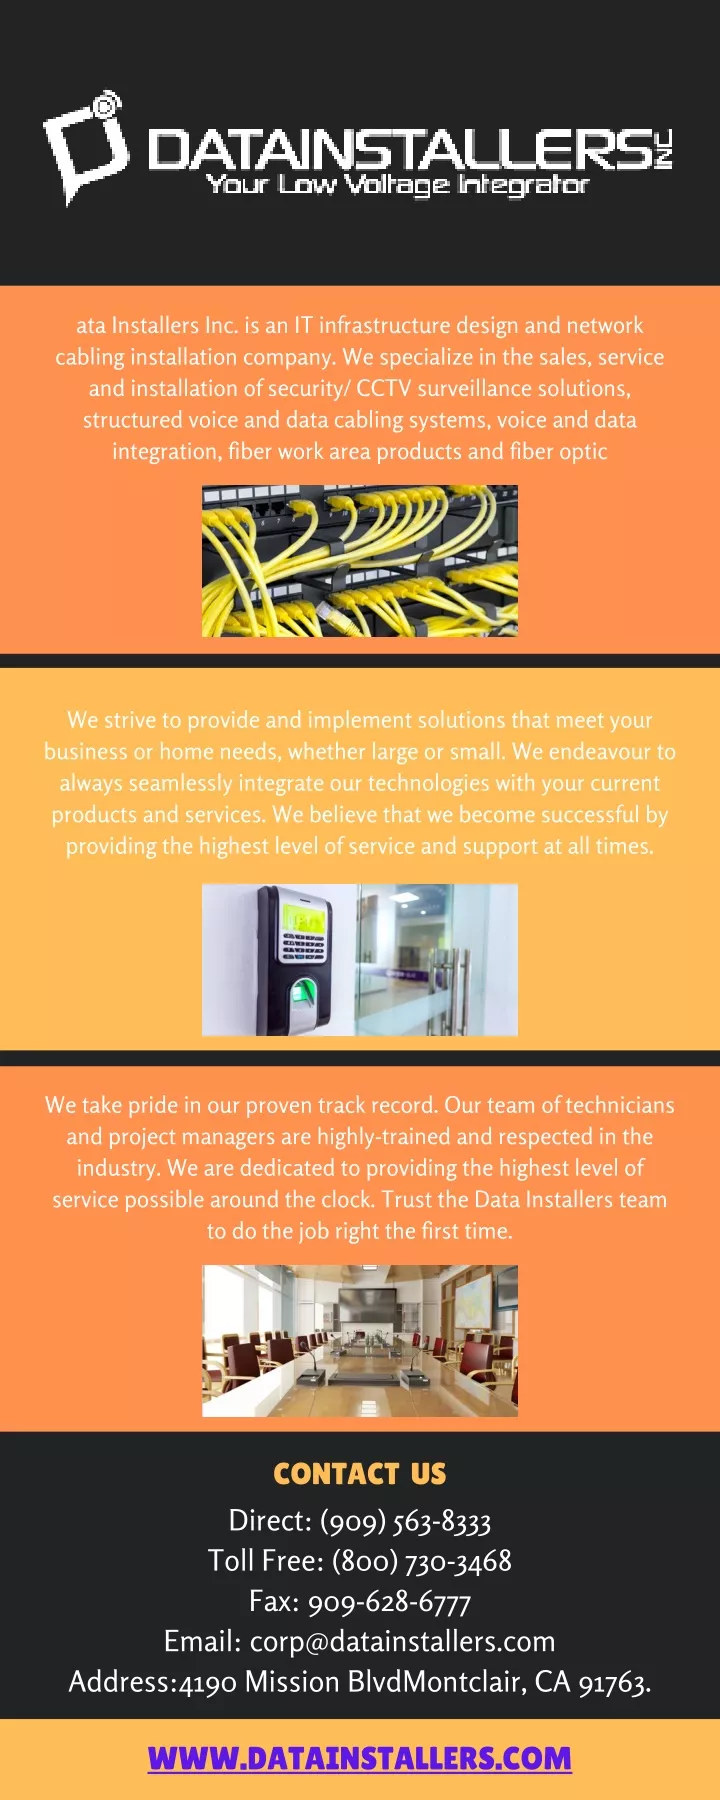 ata installers inc is an it infrastructure design